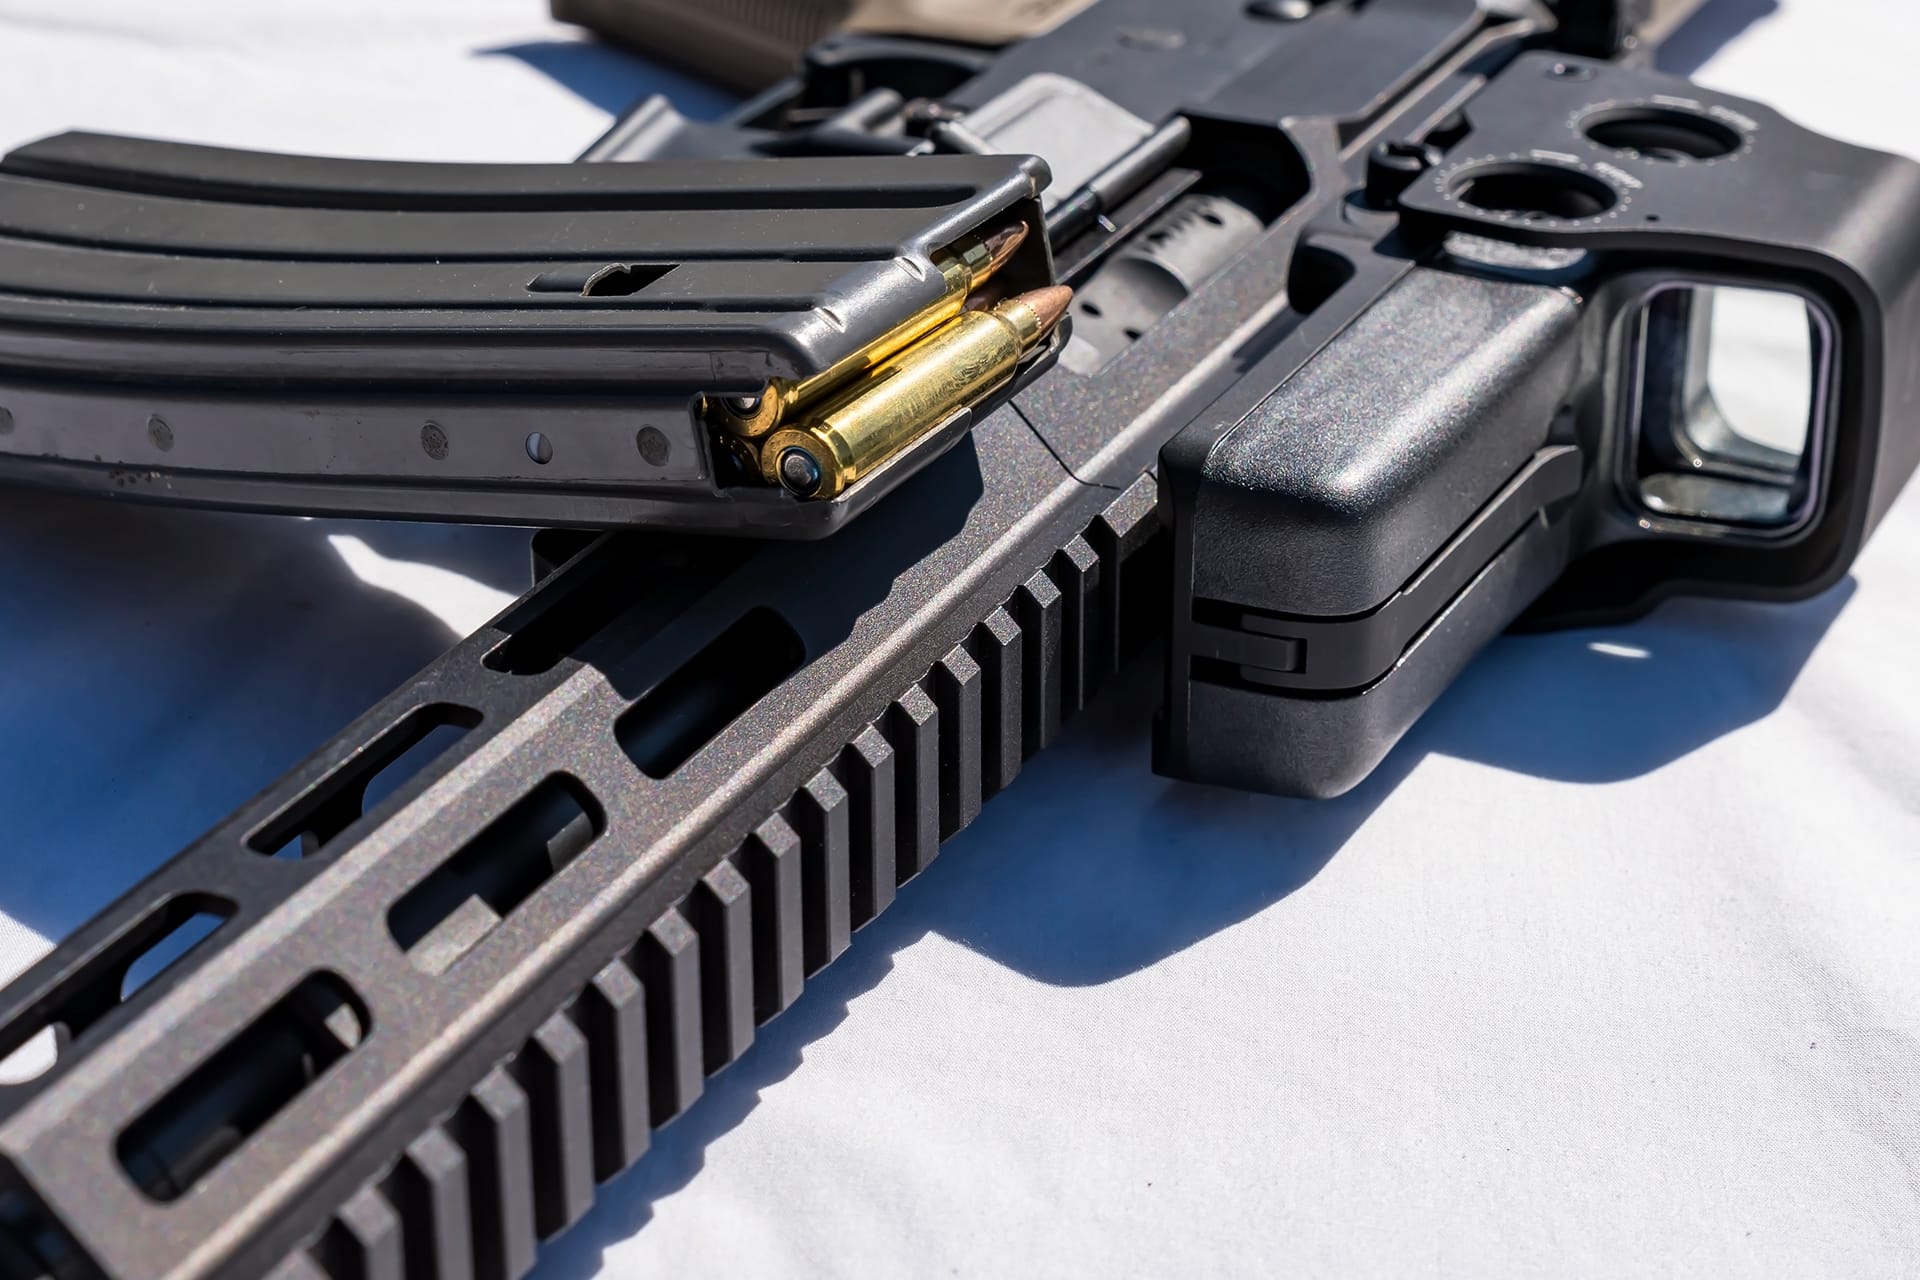 https://vigliottilaw.com/wp-content/uploads/2022/11/bigstock-A-Rifle-Magazine-Loaded-With-434242685.jpg